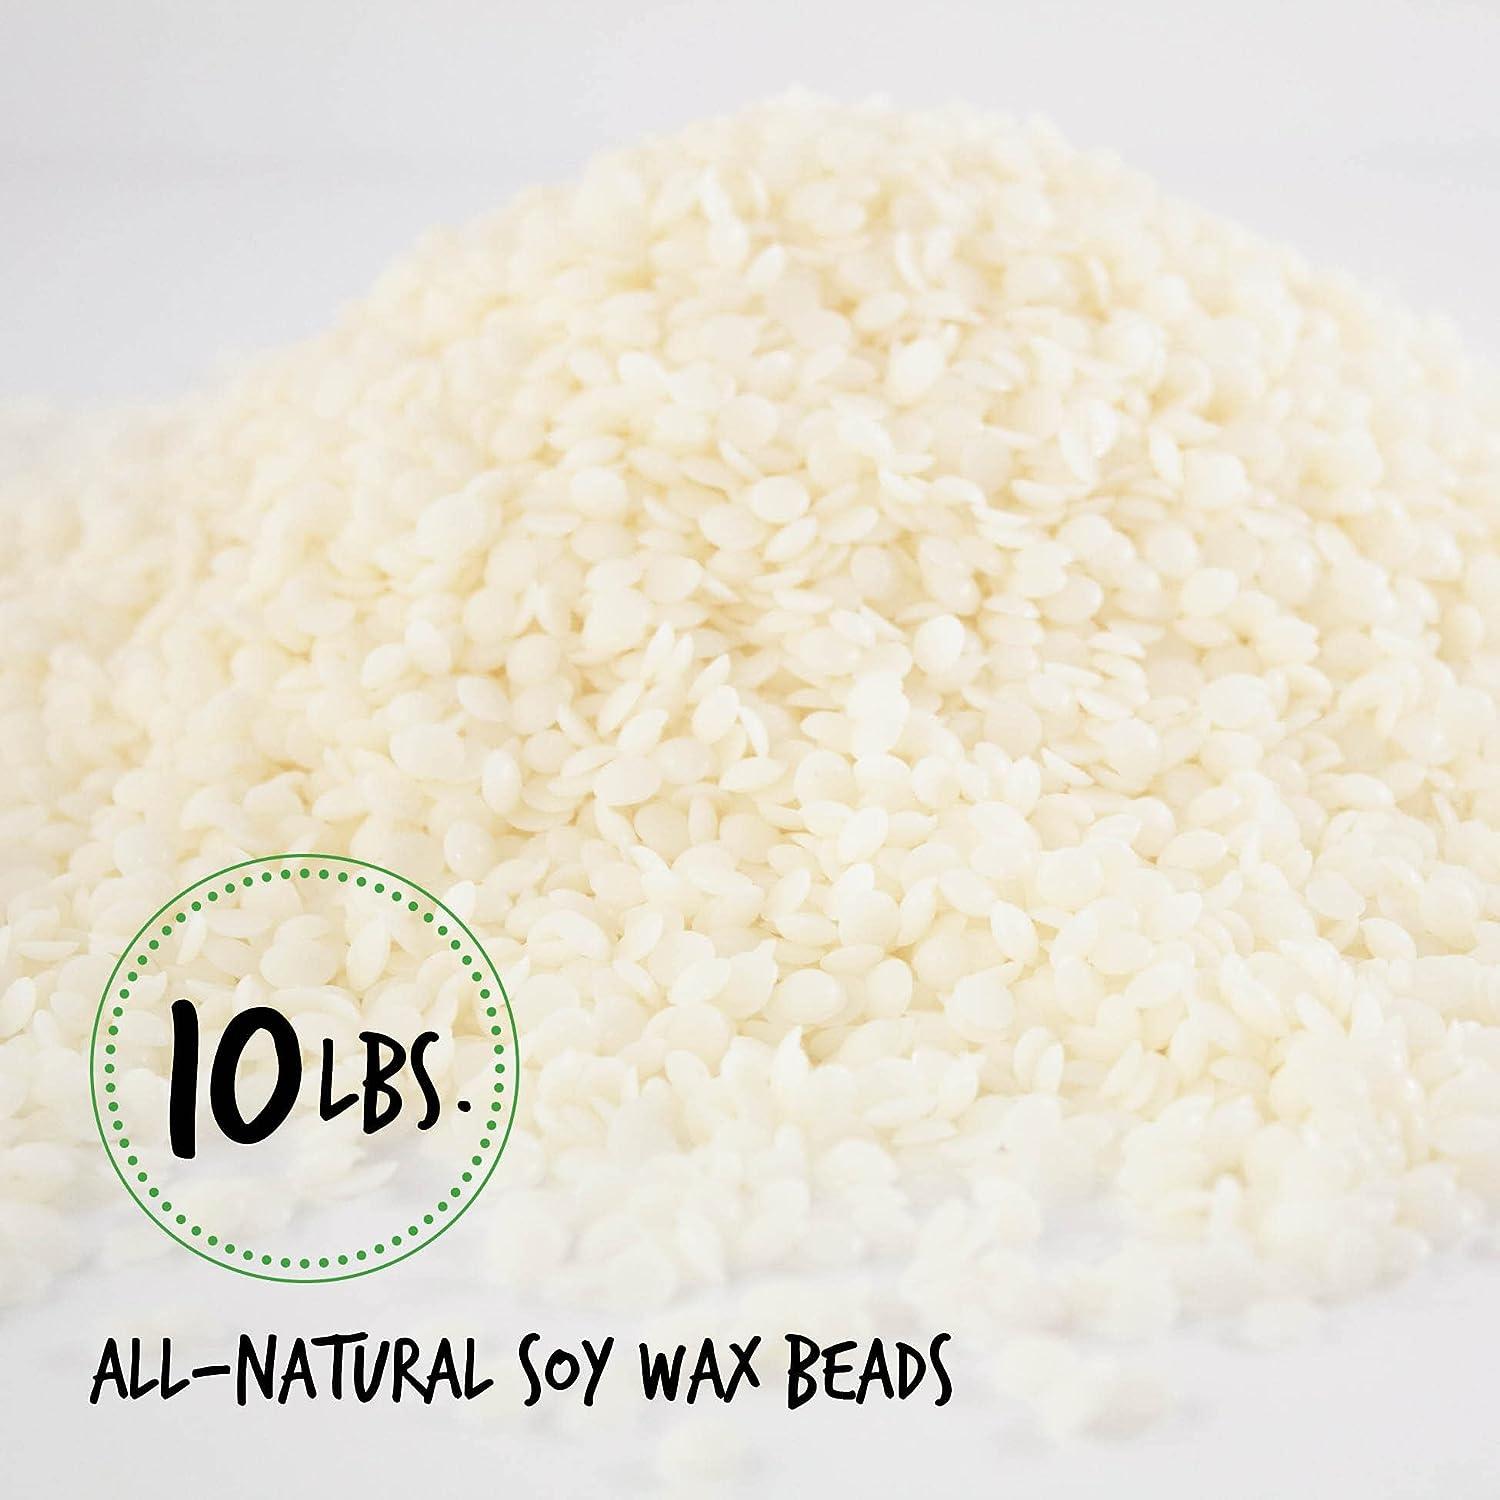 American Soy Organics- 10 lb of Freedom Soy Wax Beads for Candle Making  Microwavable Soy Wax Beads Premium Soy Candle Making Supplies 10lb